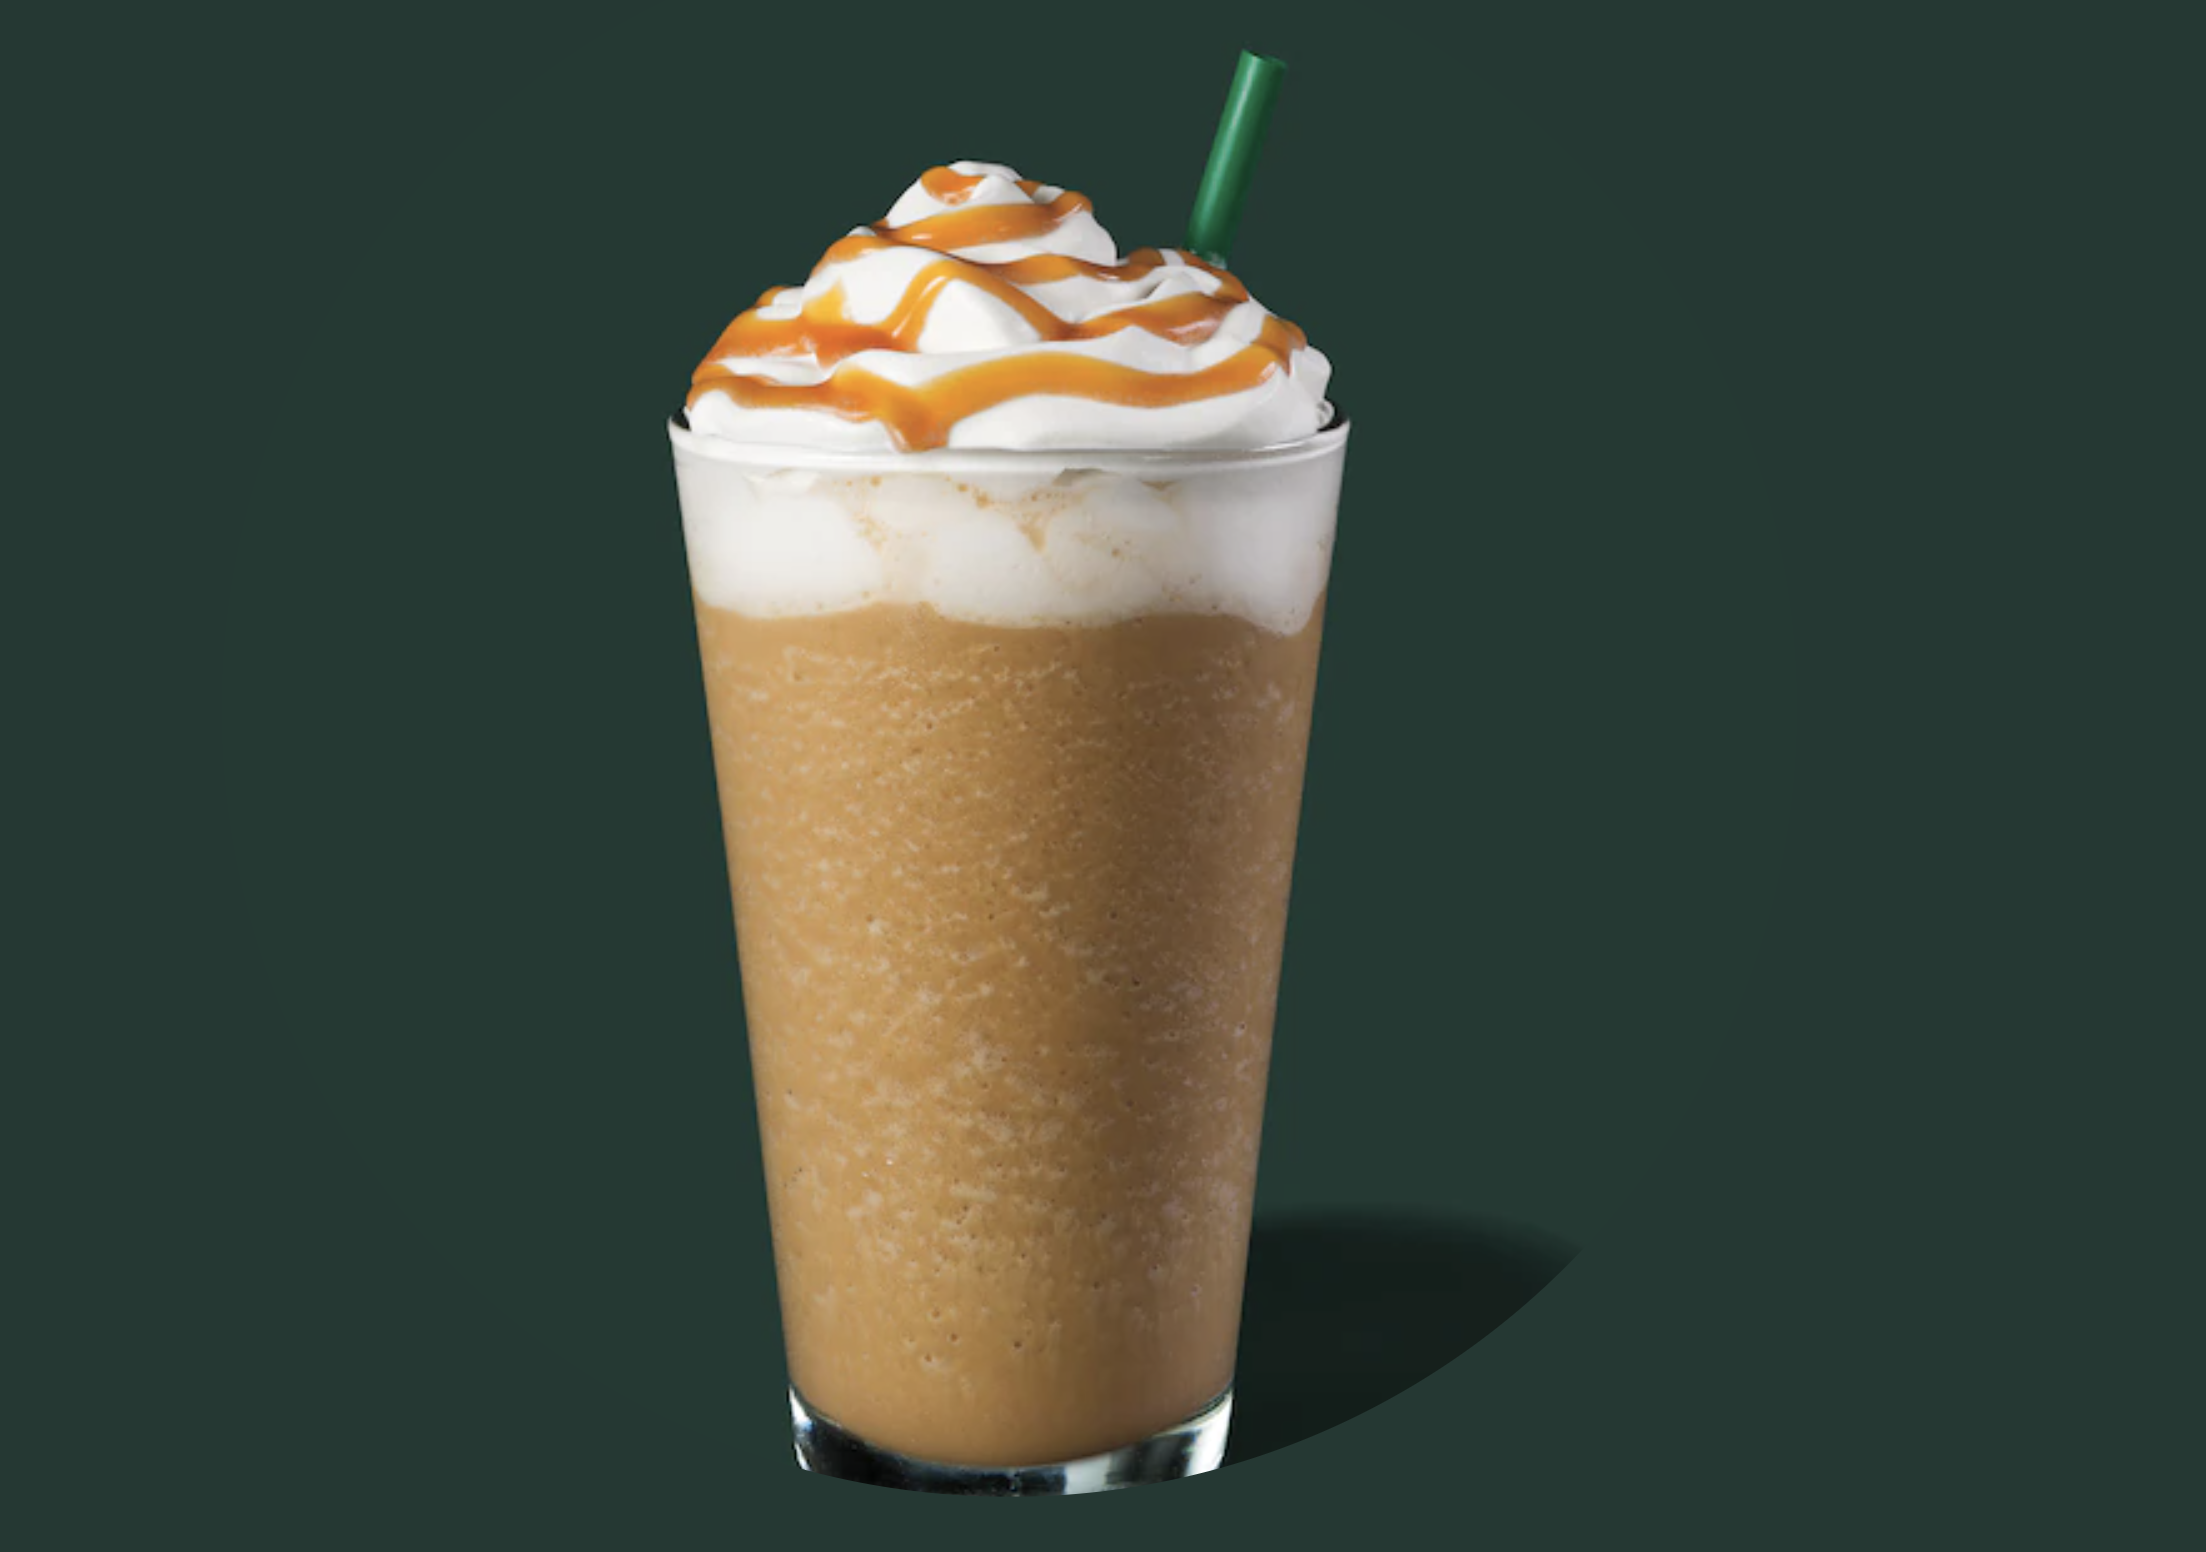 Blended coffee drink with whipped cream and caramel drizzle